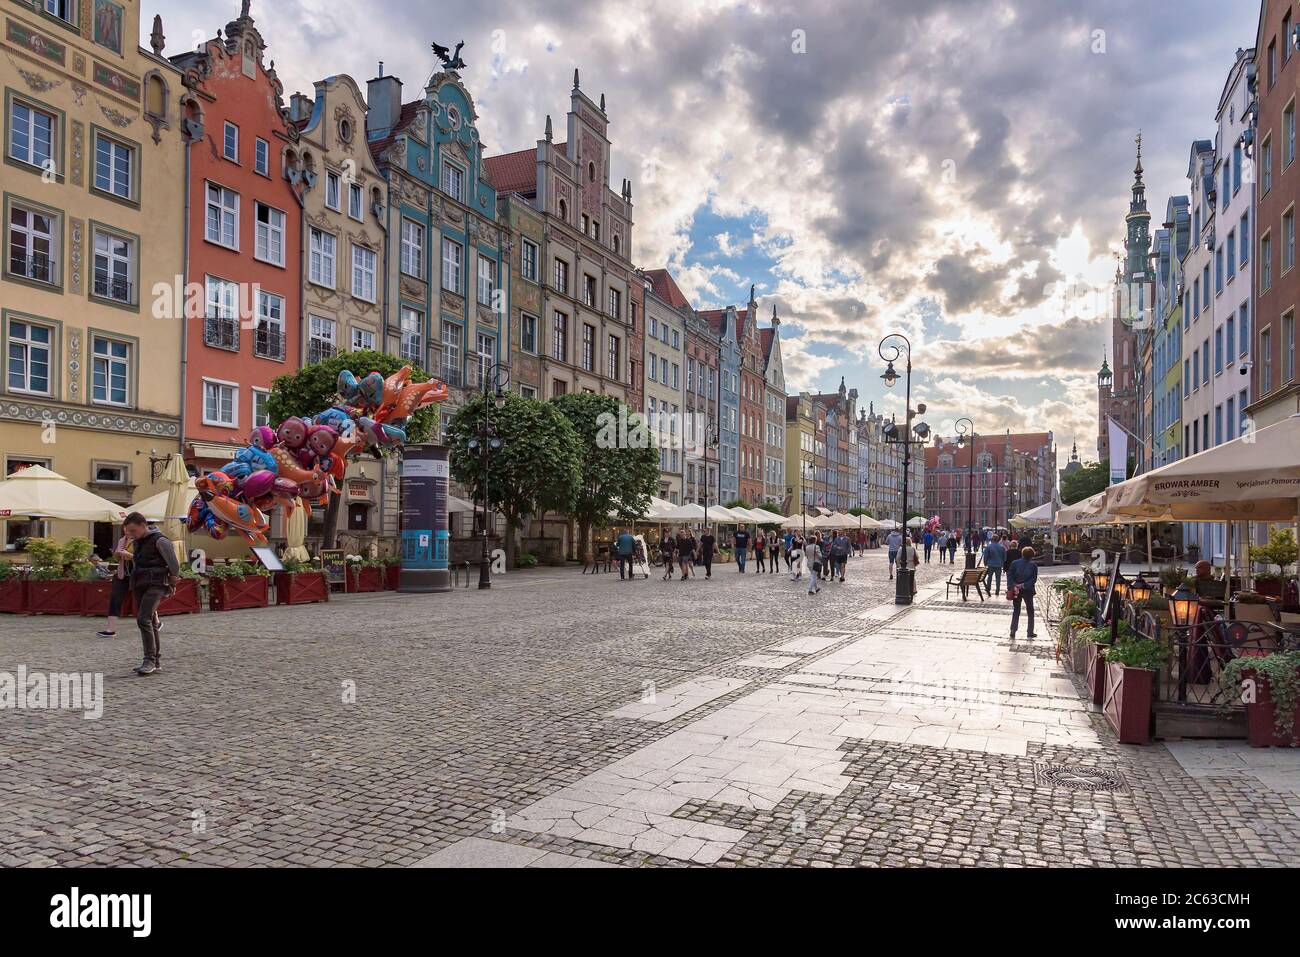 Gdansk, Poland - June 14, 2020: People visit Long Market Square, one of the most distinctive location in the city Stock Photo